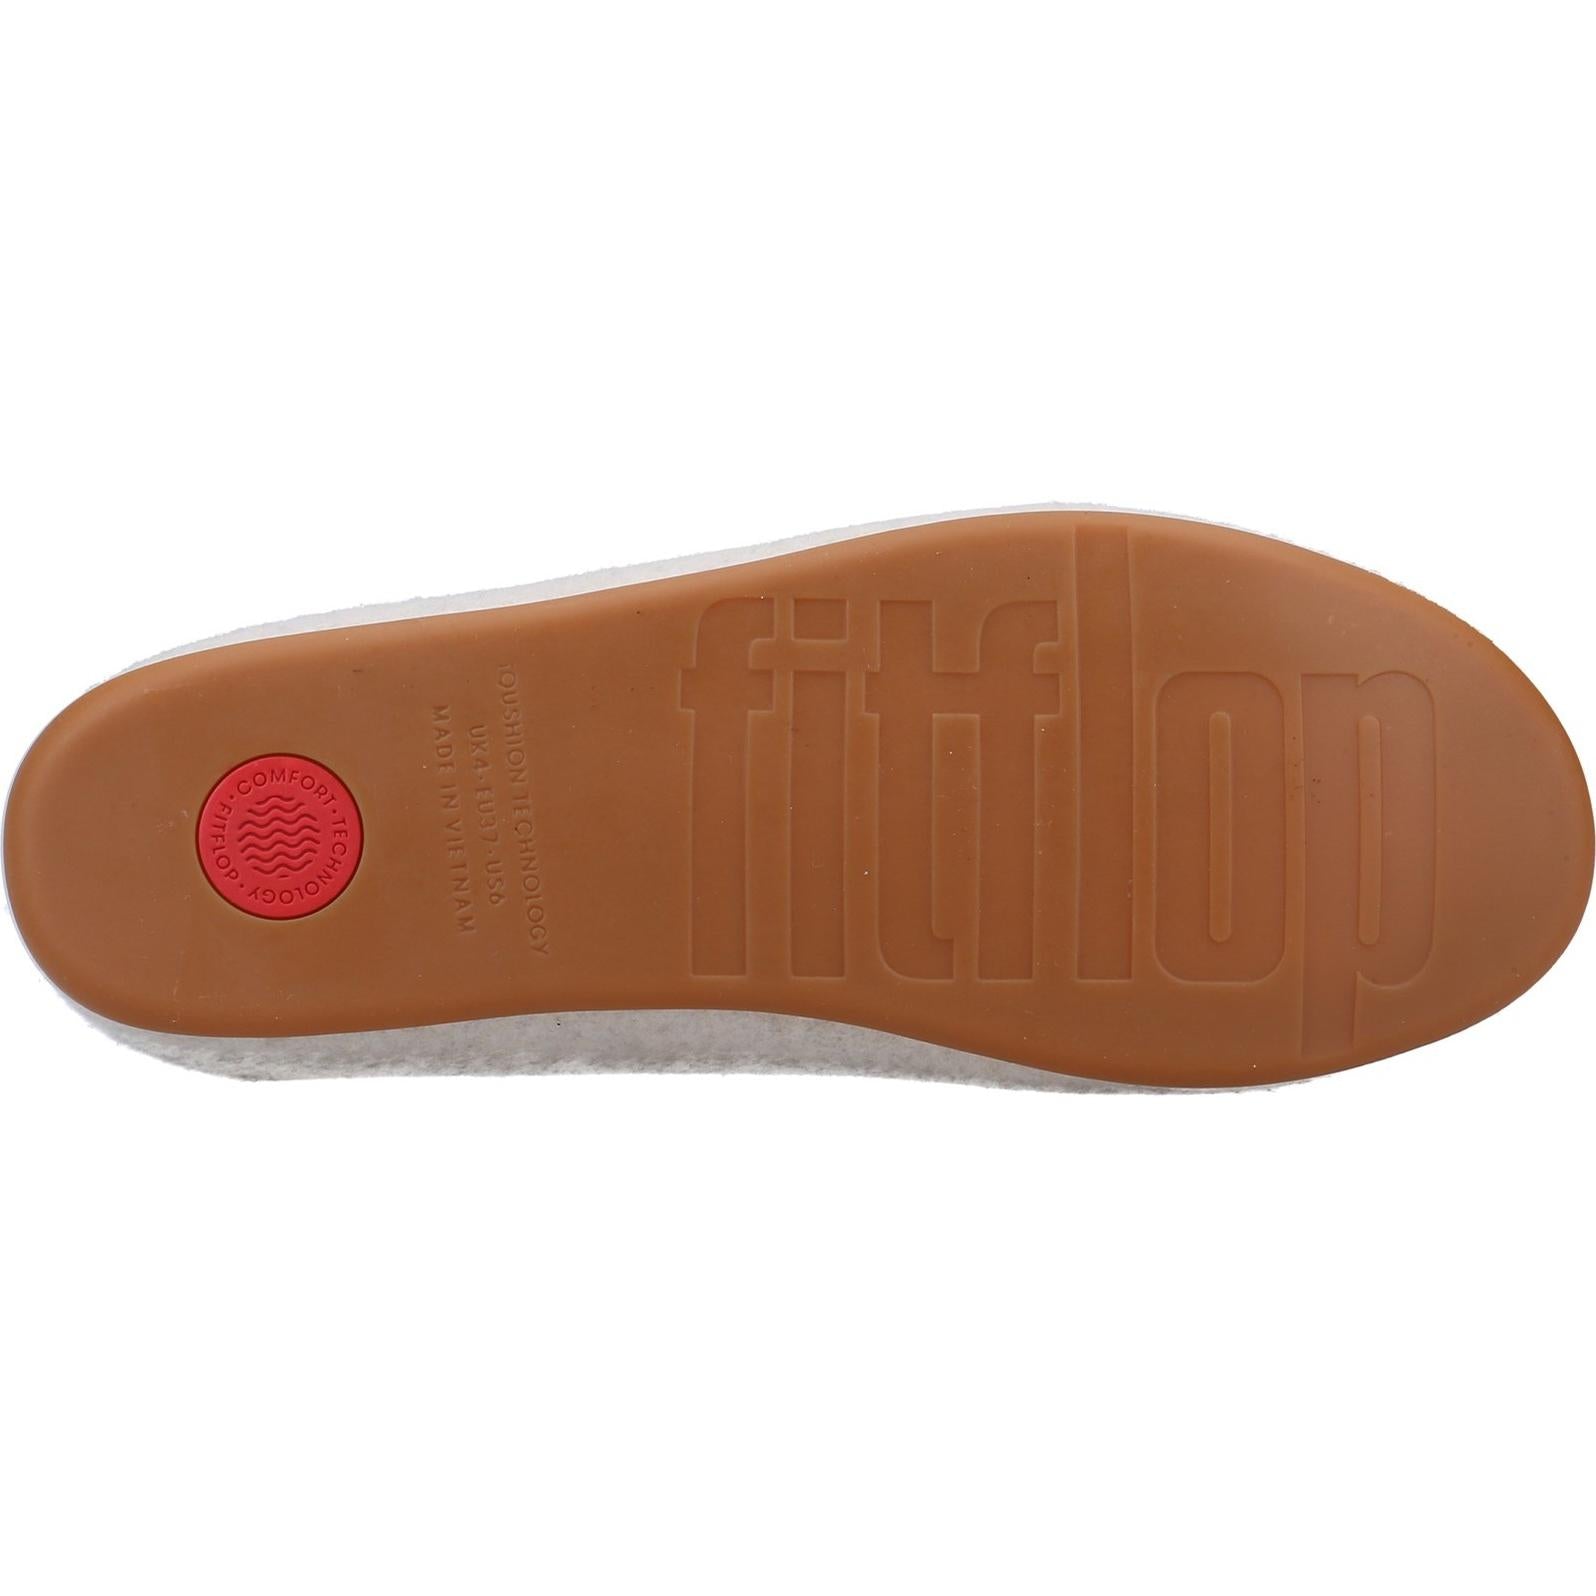 Fitflop Chrissie Slippers